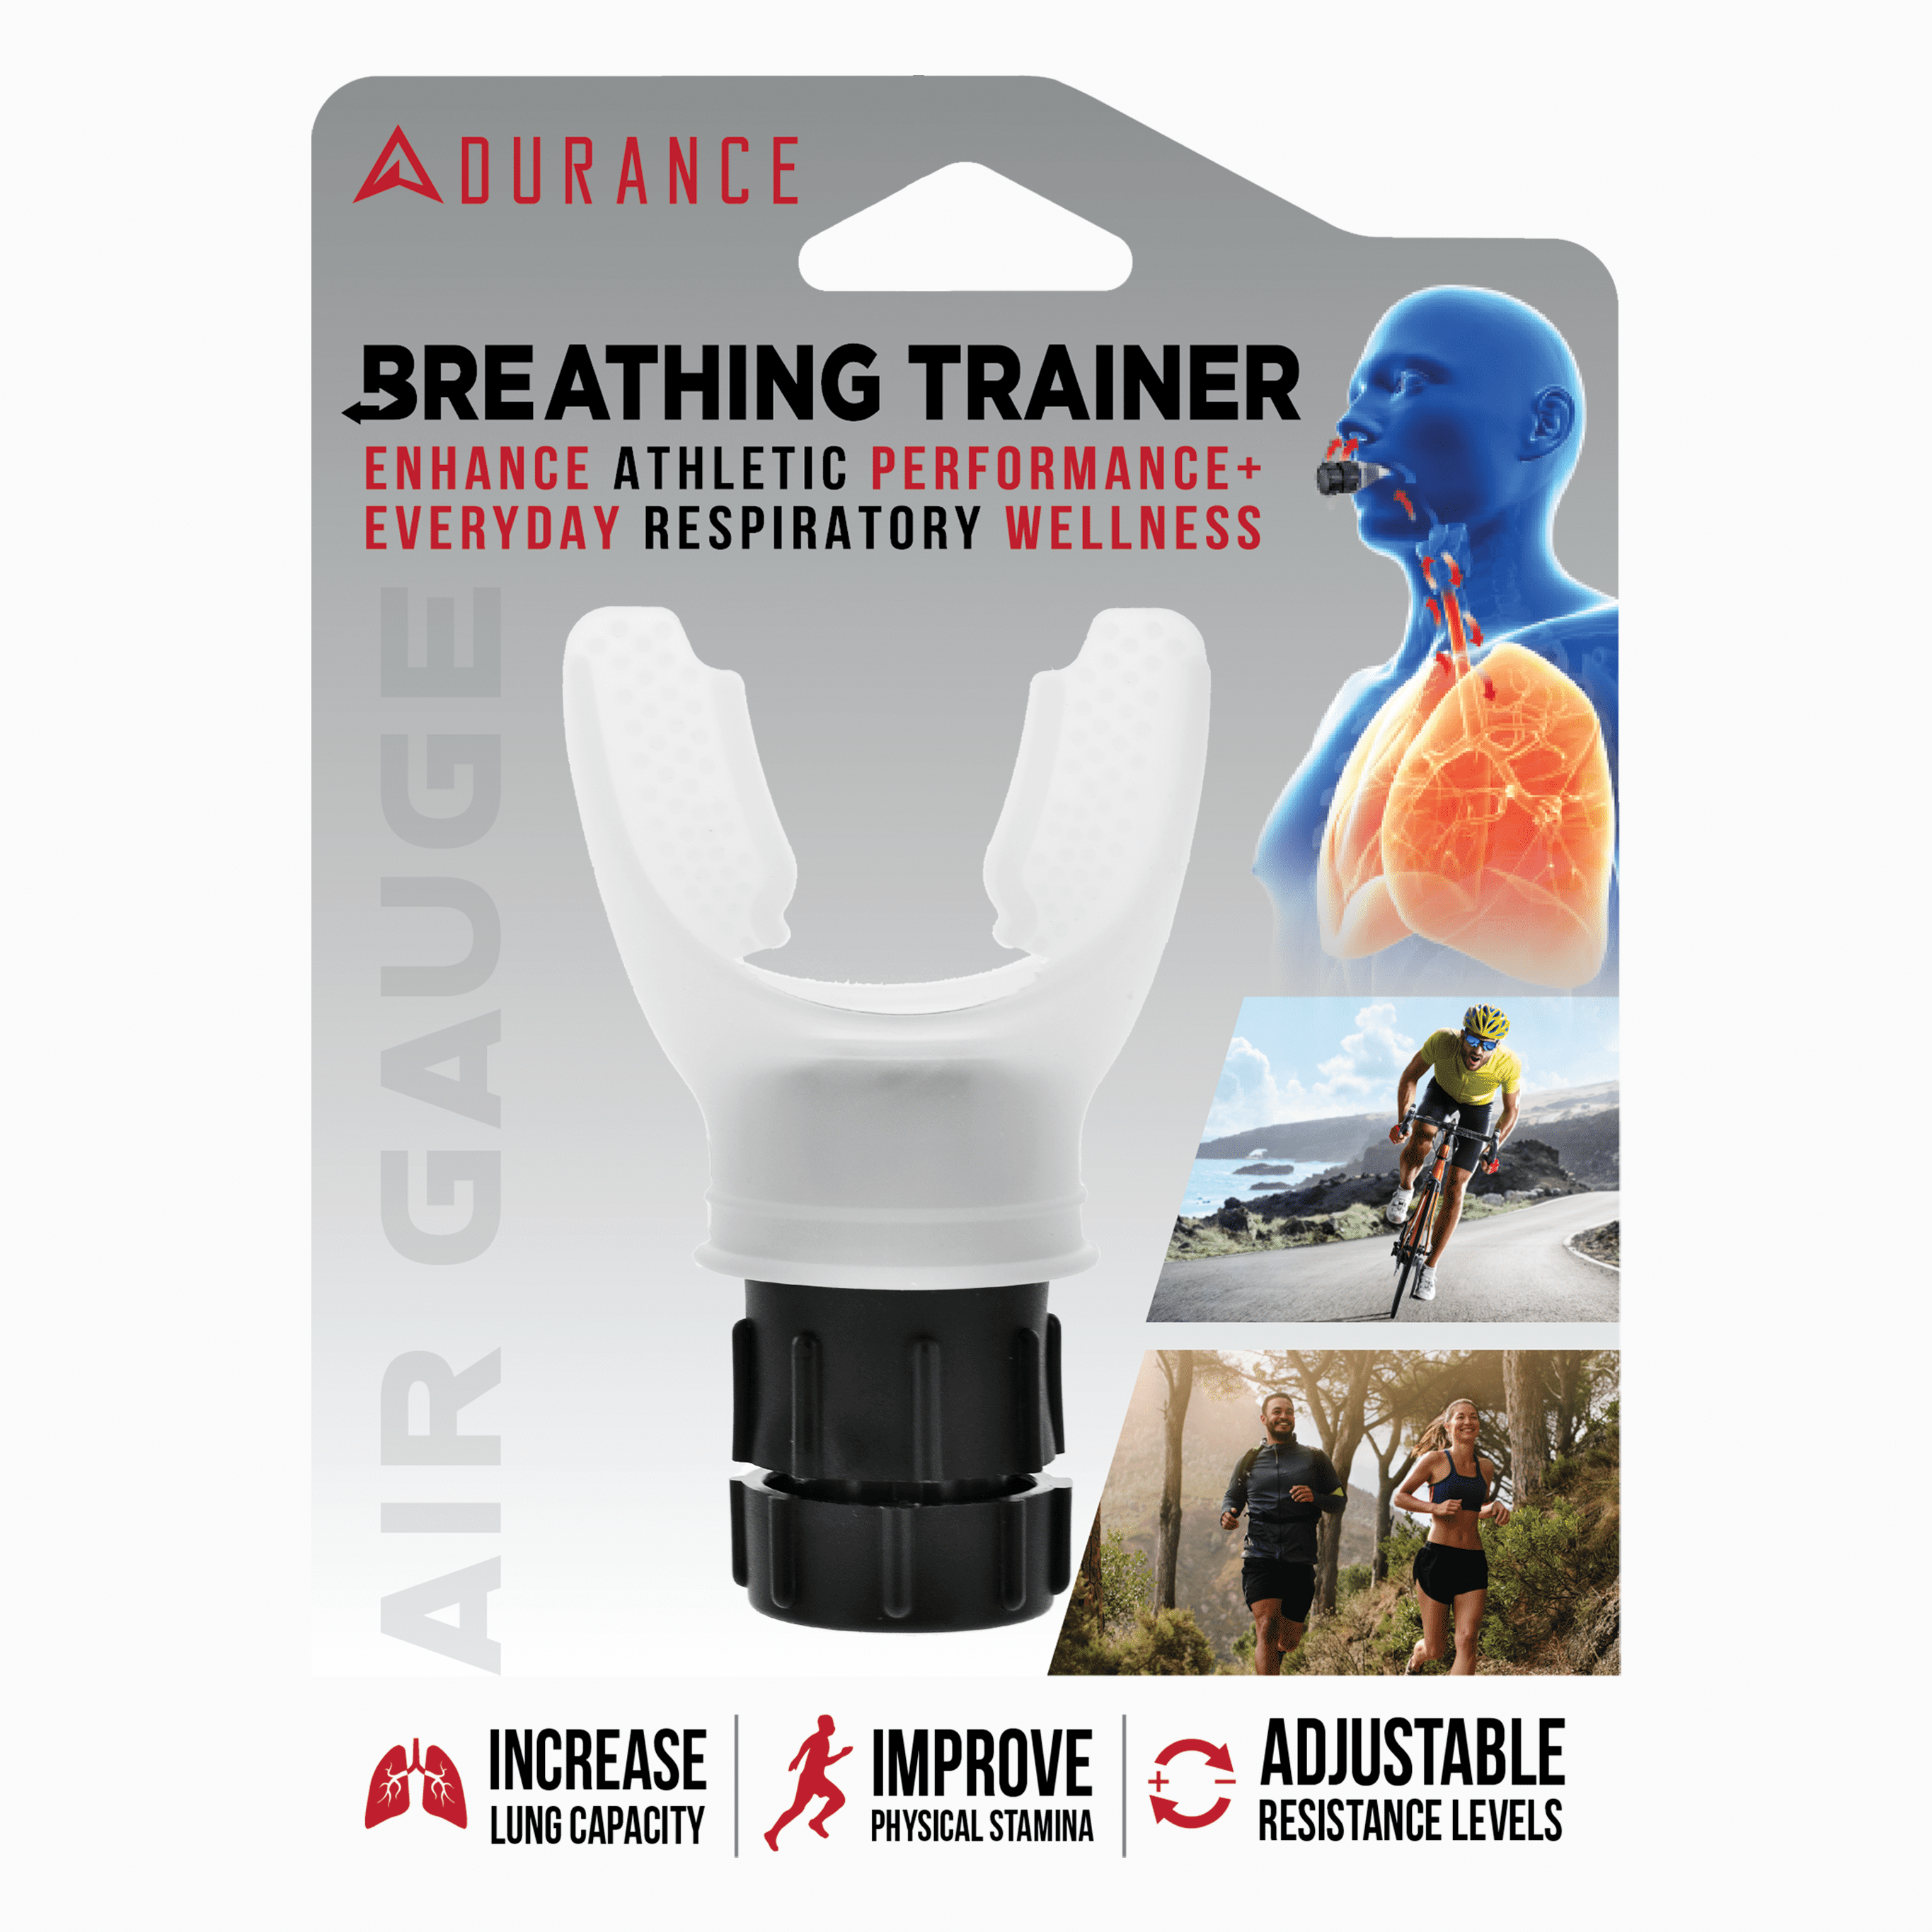 Lung & Fitness Trainer (RMT Training)